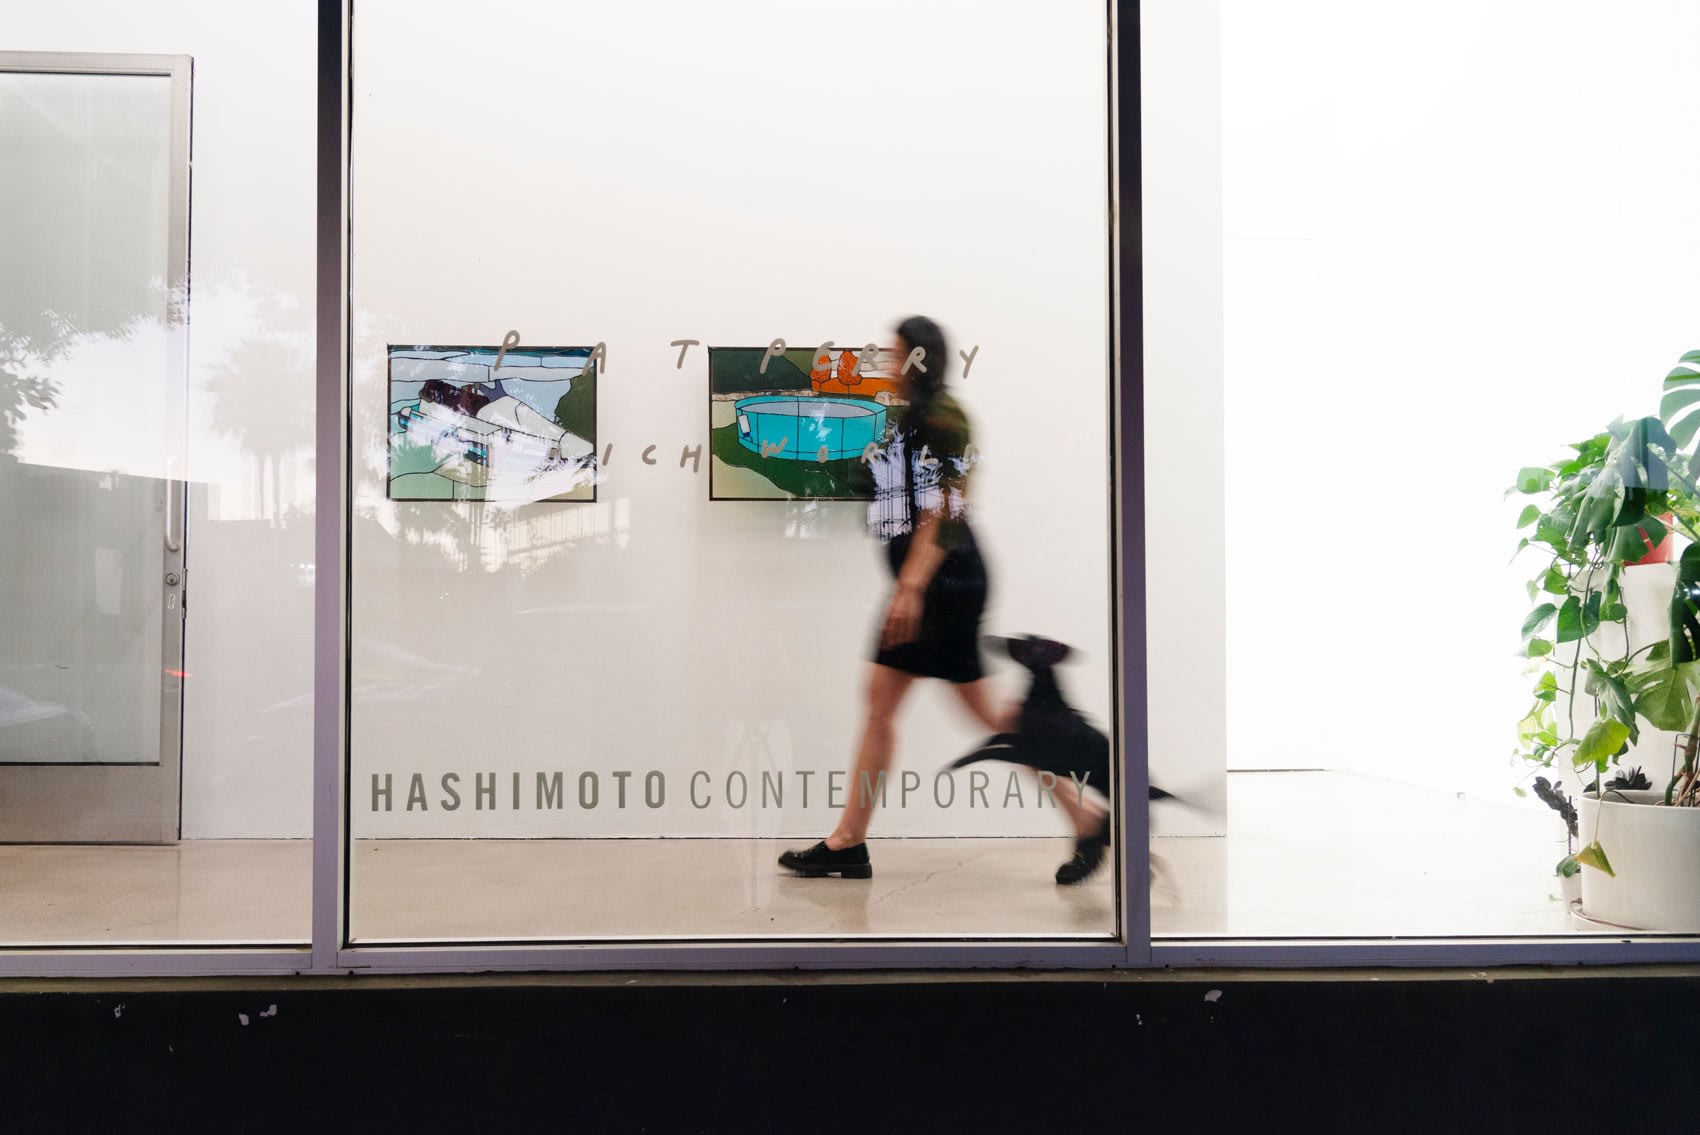 A long exposure shot from outside the gallery shows blurry people walking past two stained glass artworks on the wall, behind the art gallery's window, which reads 